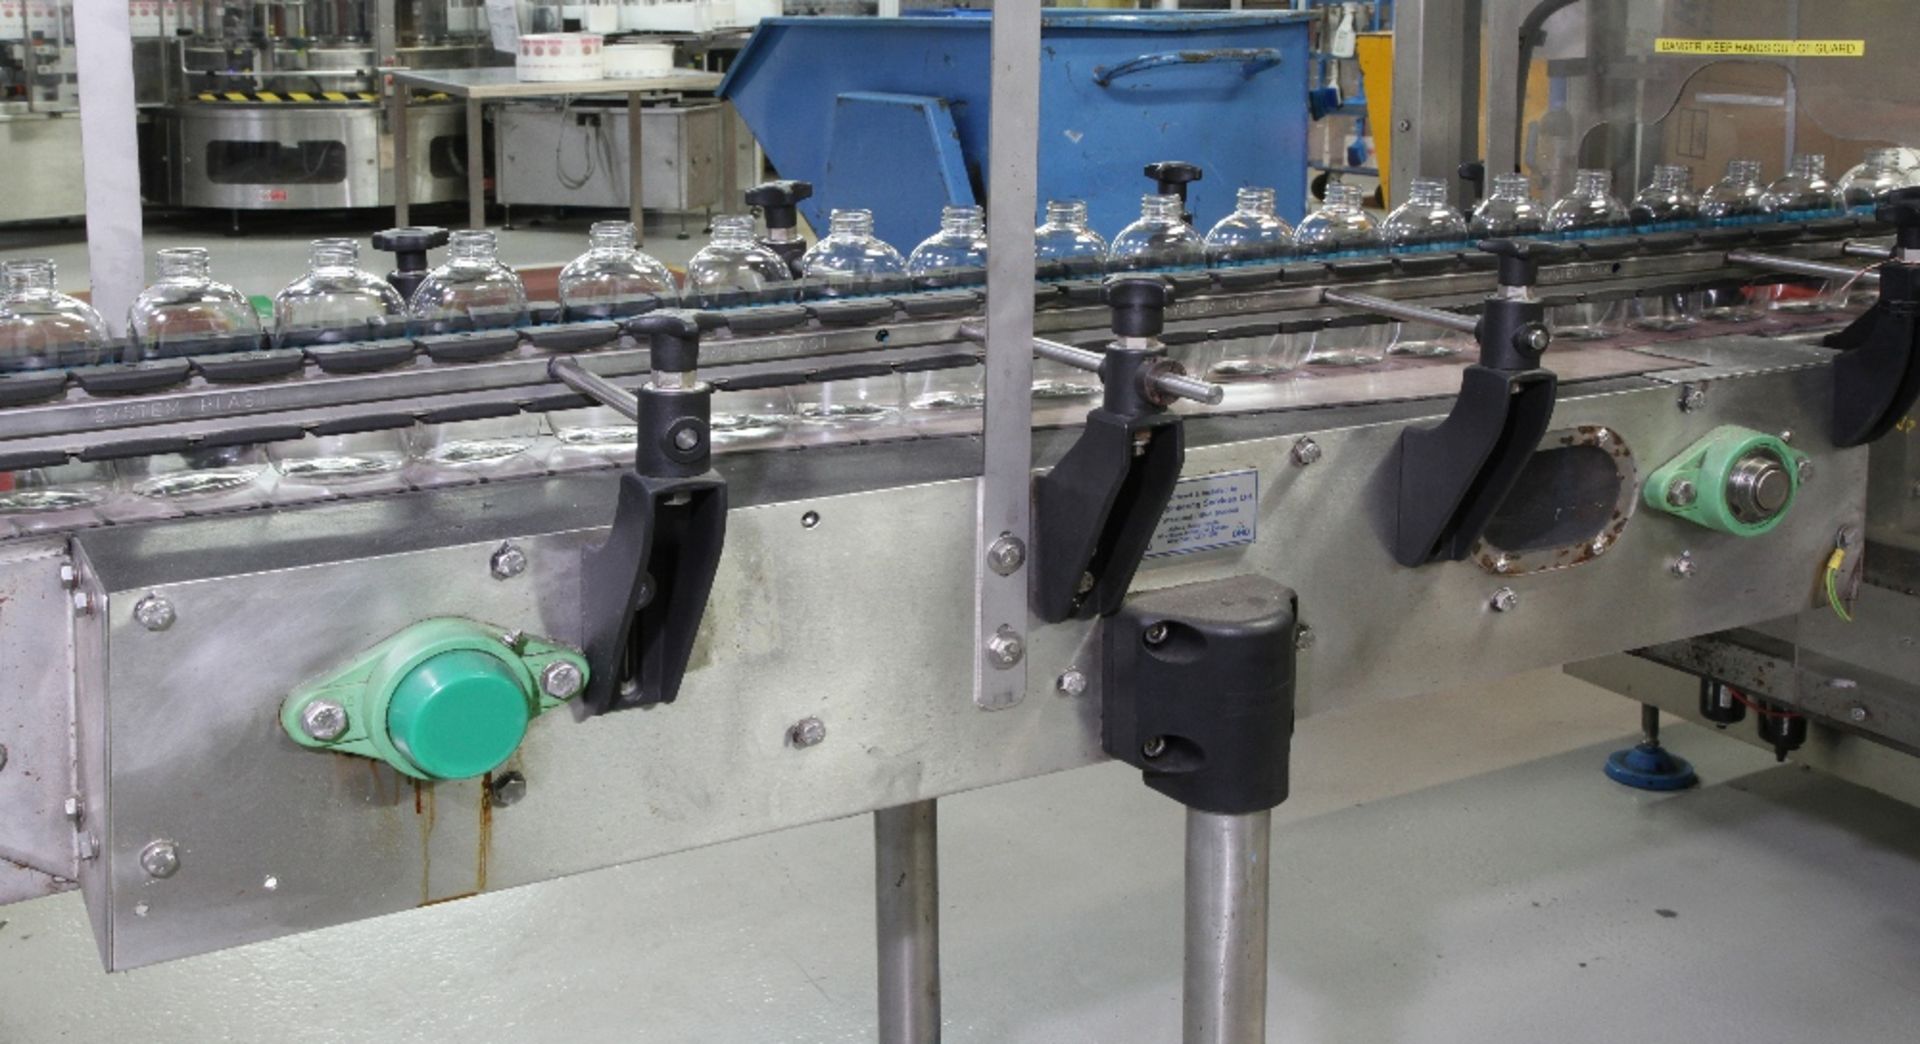 Contents Of World Class Manufacturer's Bottling Line. - Image 23 of 87